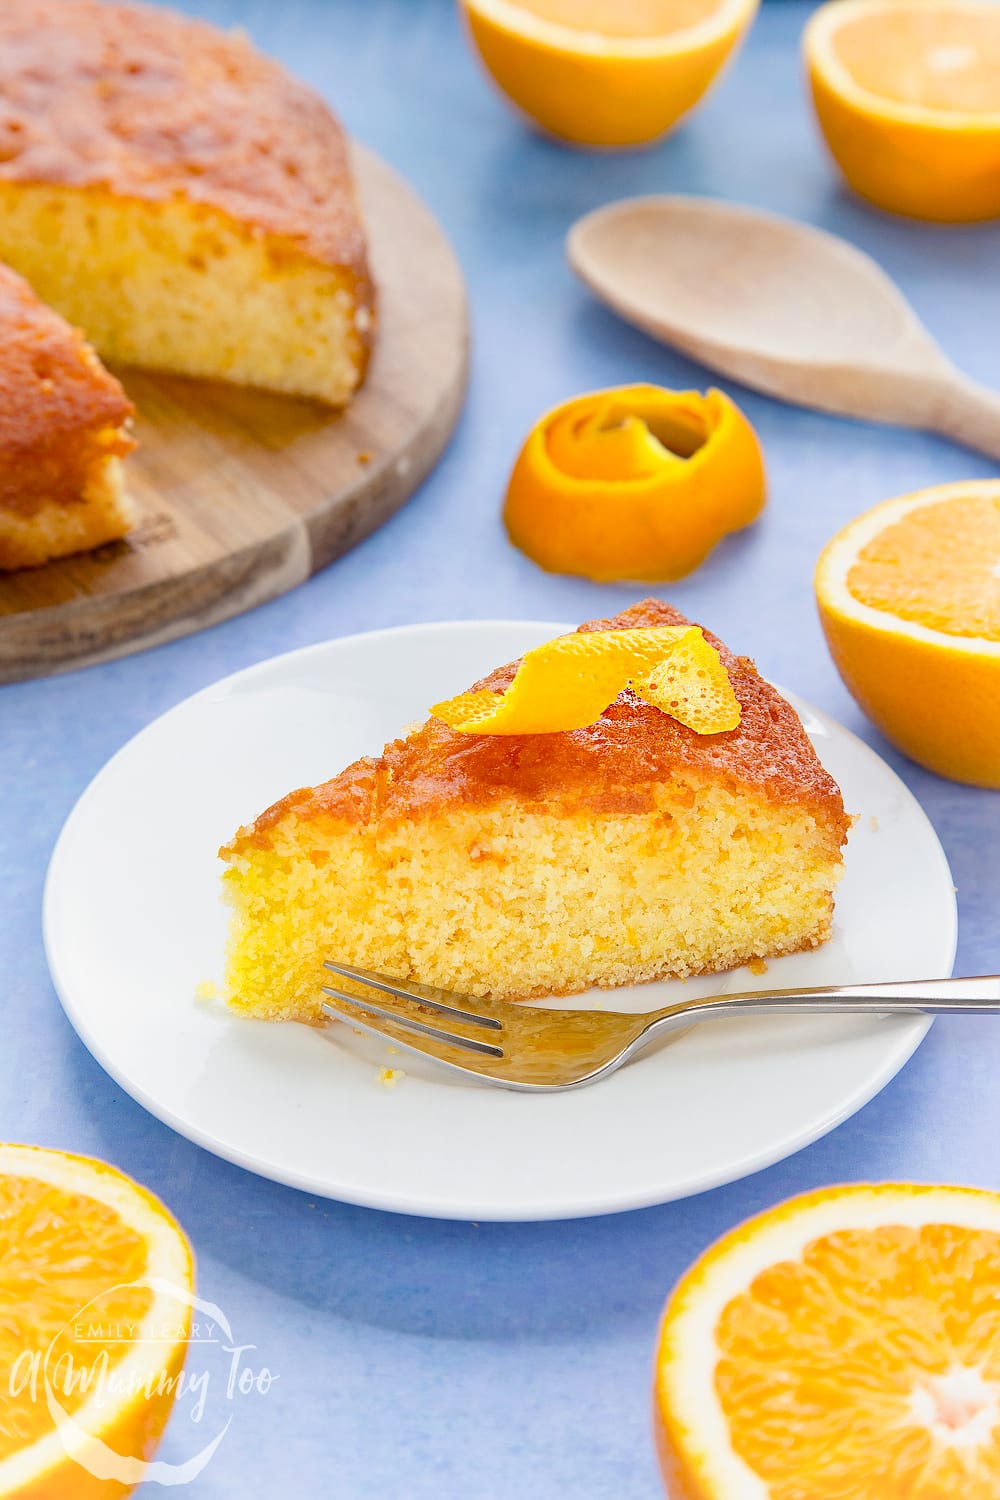 A slice of orange drizzle cake served on a small white plate. A cake fork rests on the plate.